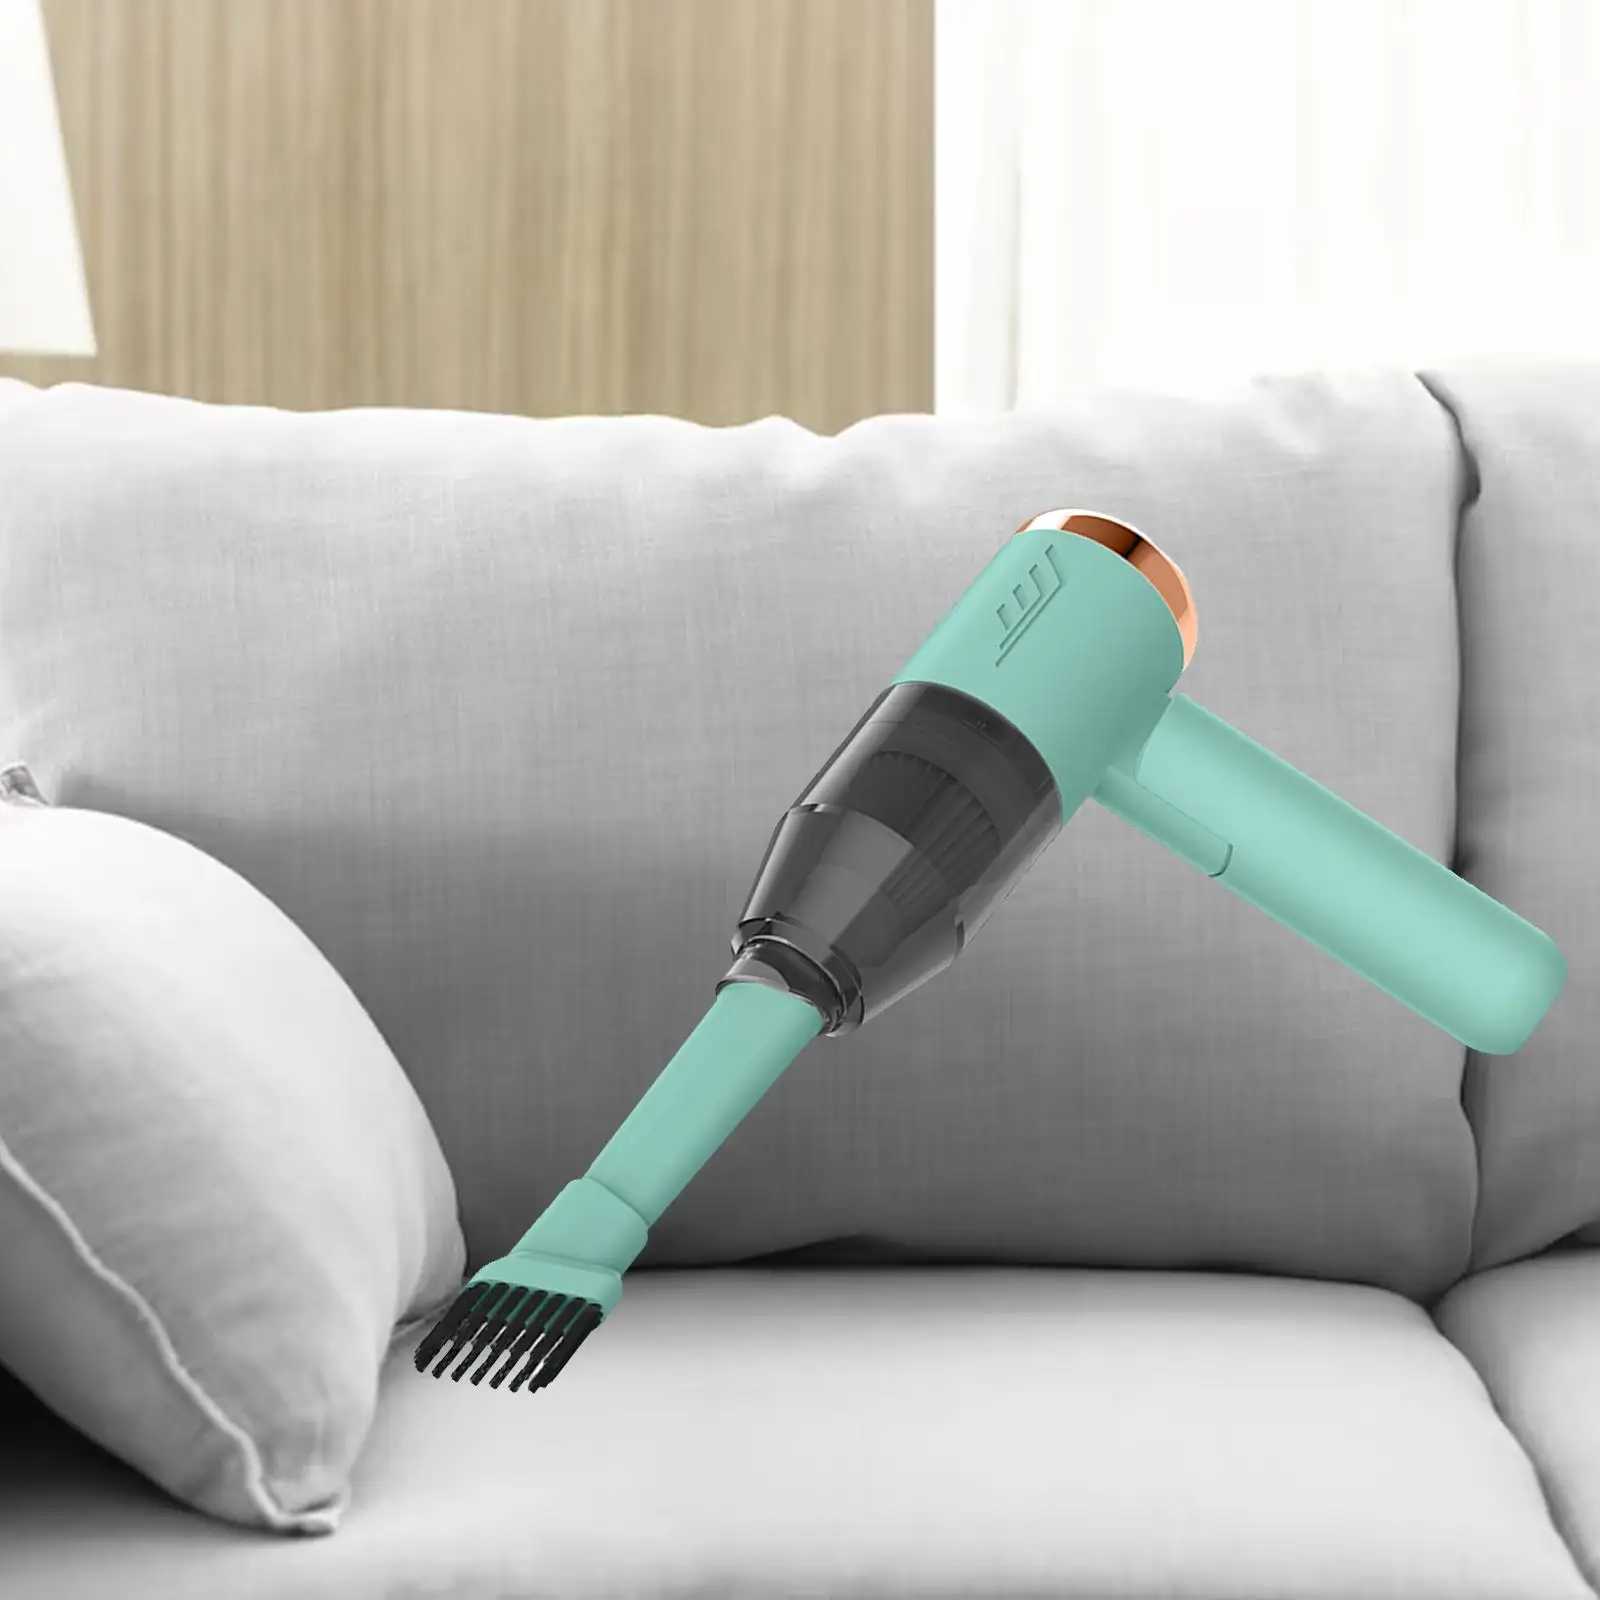 Cordless Handheld Vacuum 5W Wireless Car Vacuum Cleaner for Office Home